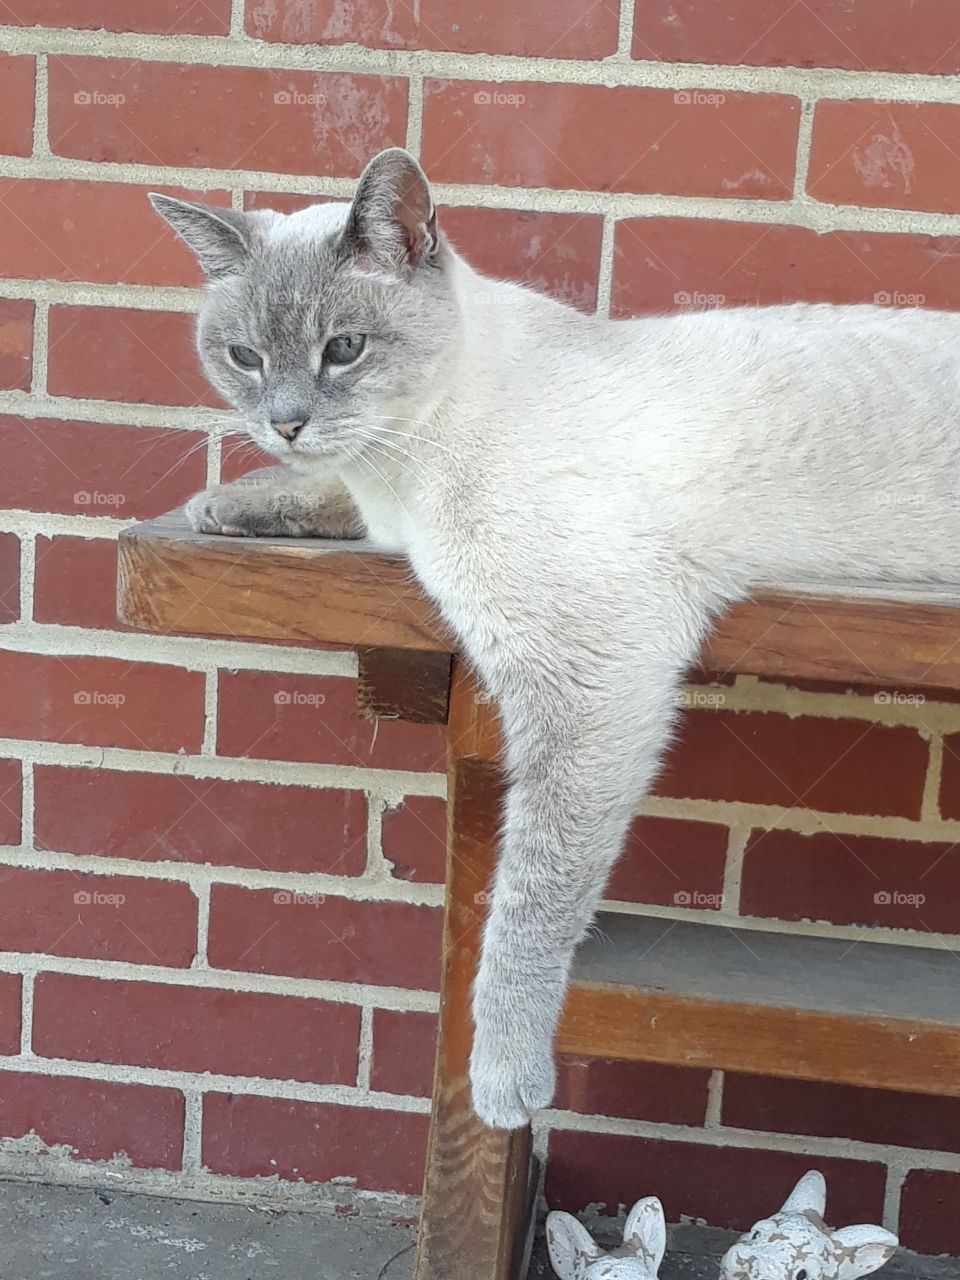 Siamese Tabby Cat on a bench with a brick background